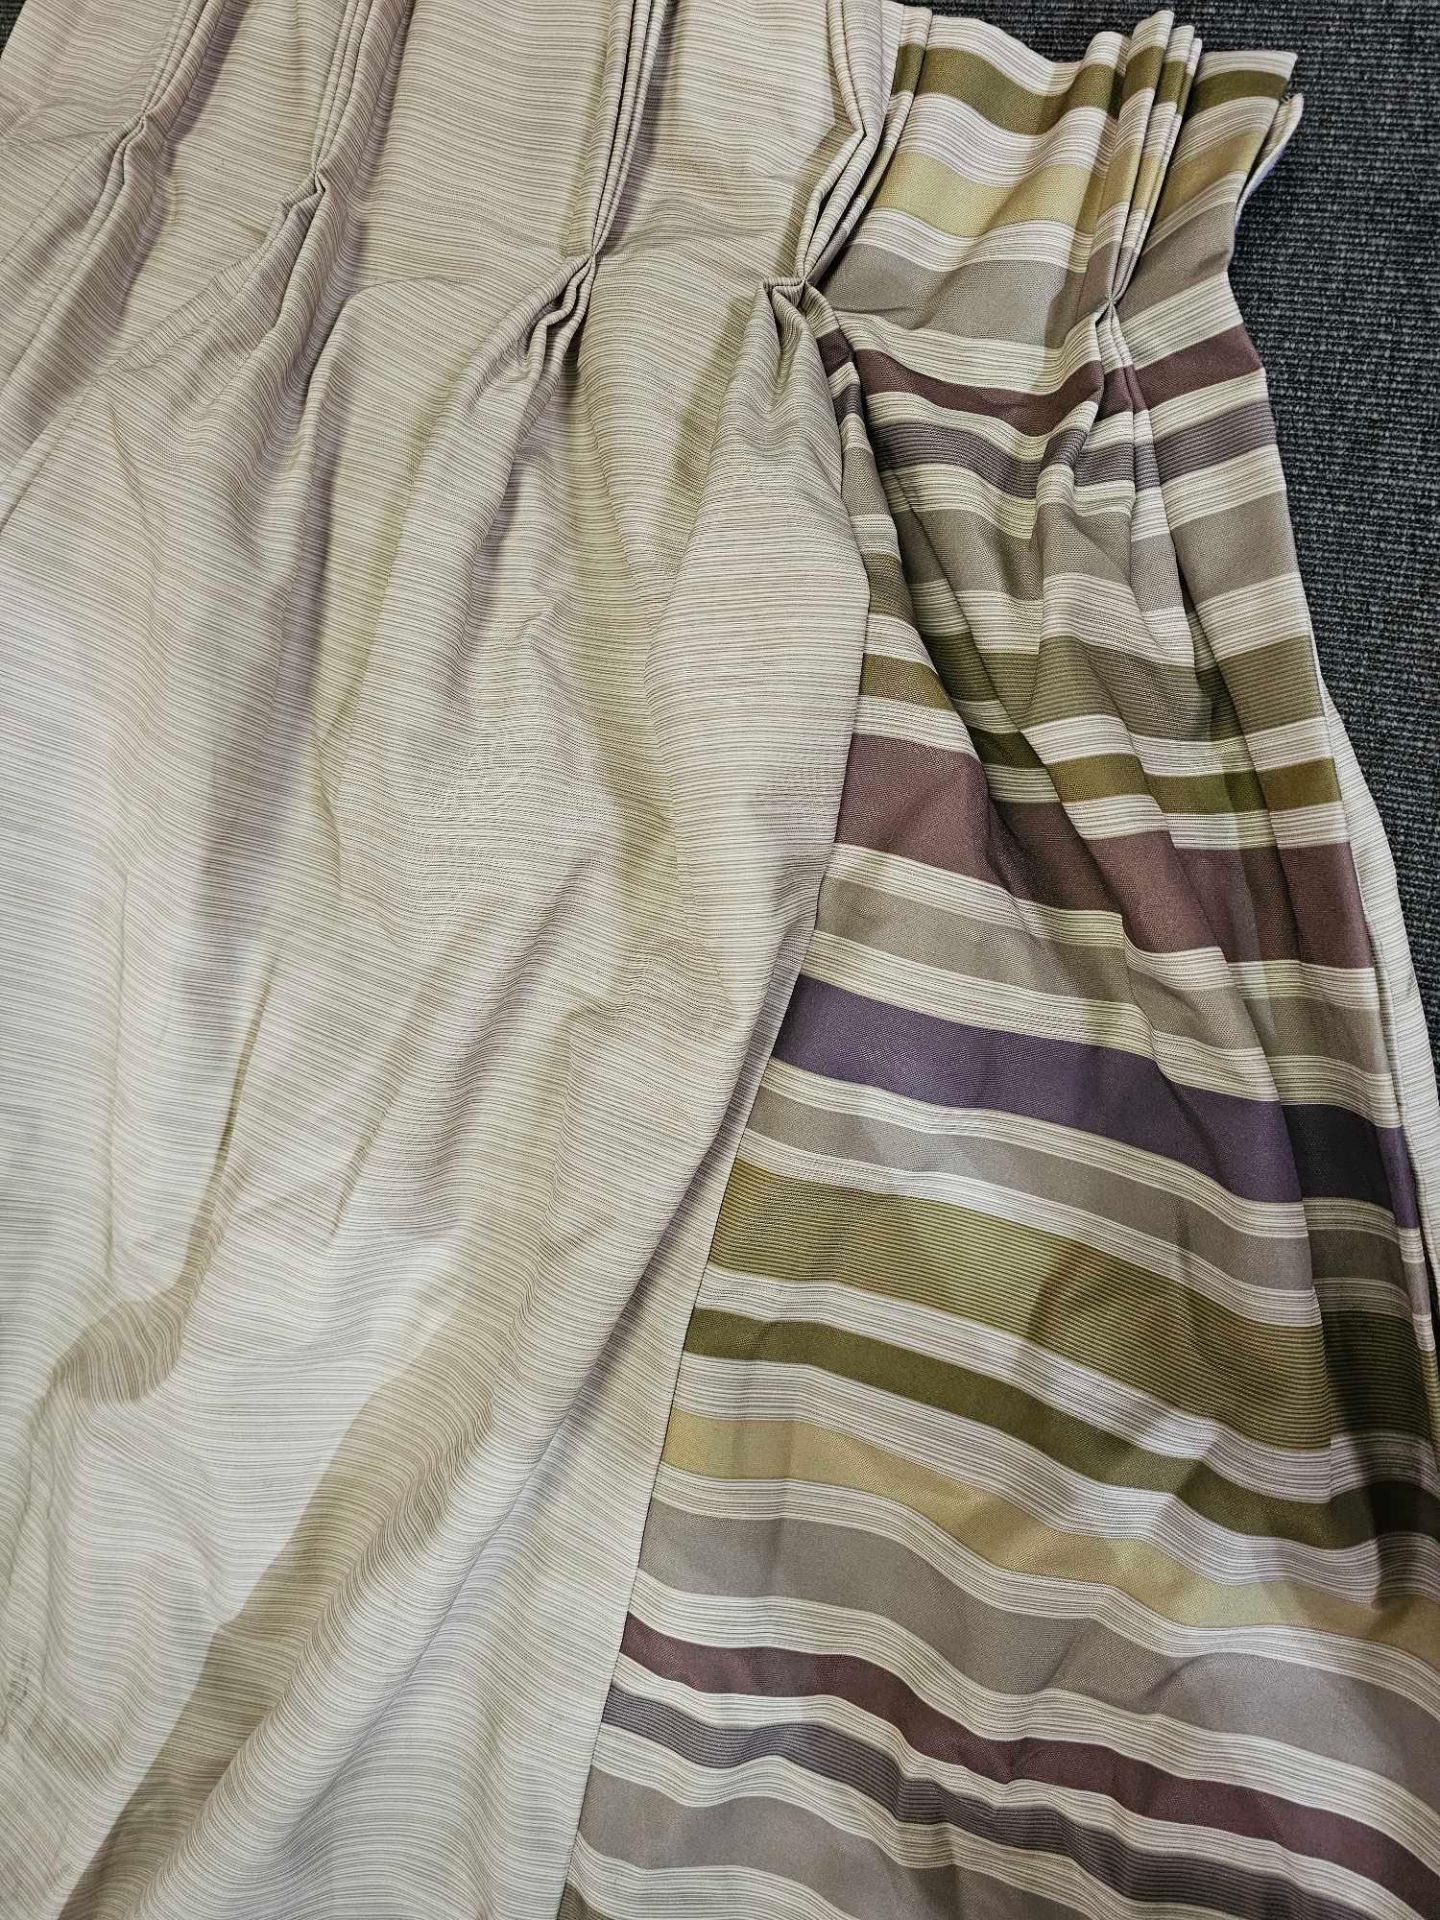 A Pair Of Curtains Striped Edge Purple/Green/Beige/Lime/Brownsize 284 x 250cm ( Ref Red 156) - Image 2 of 2